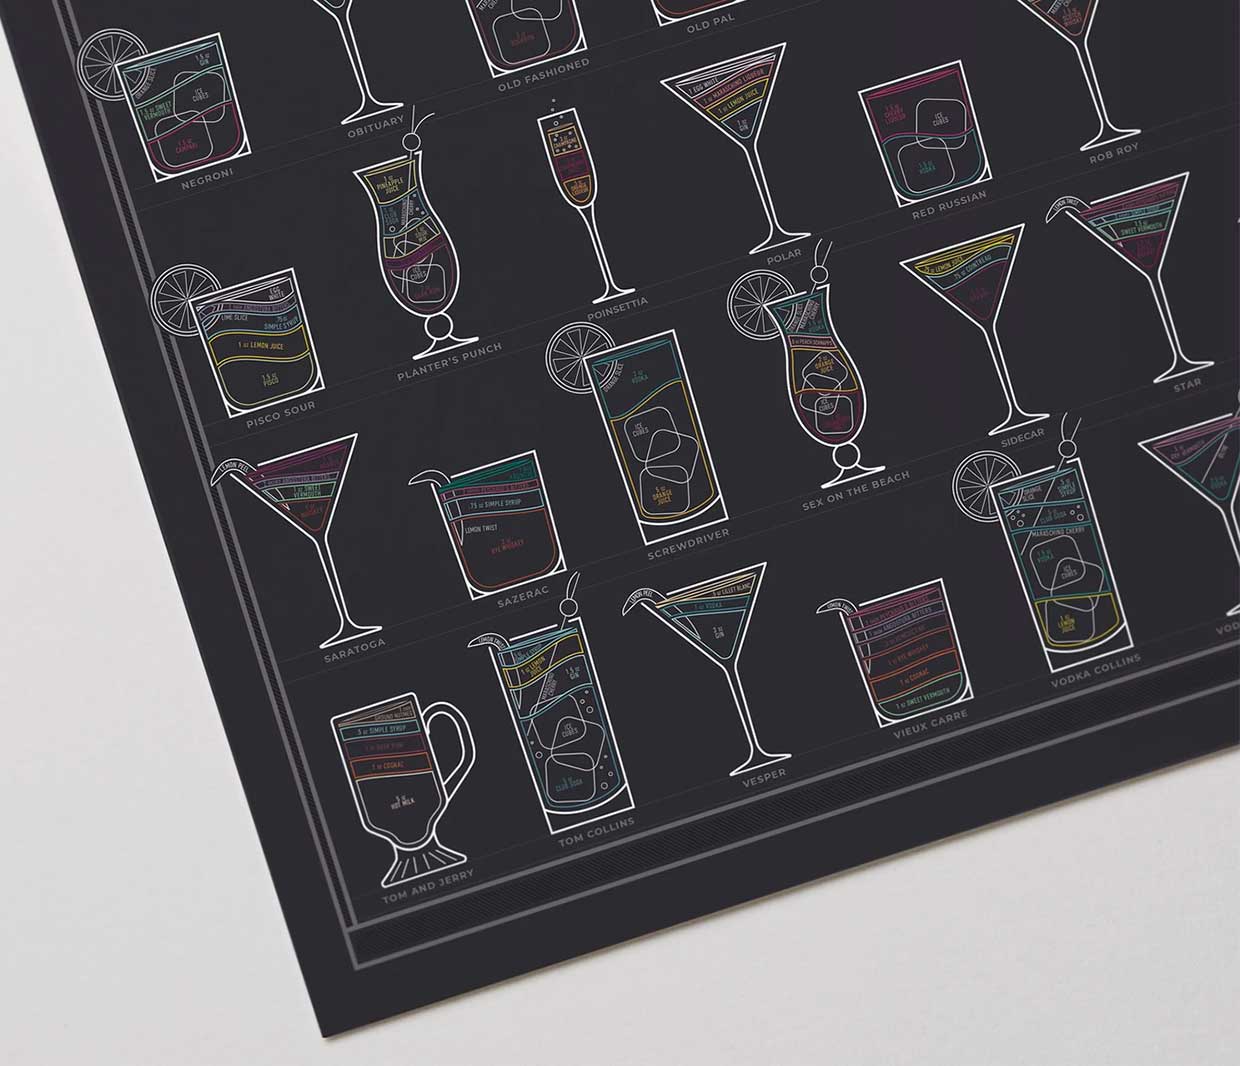 Mixed Drinks Poster